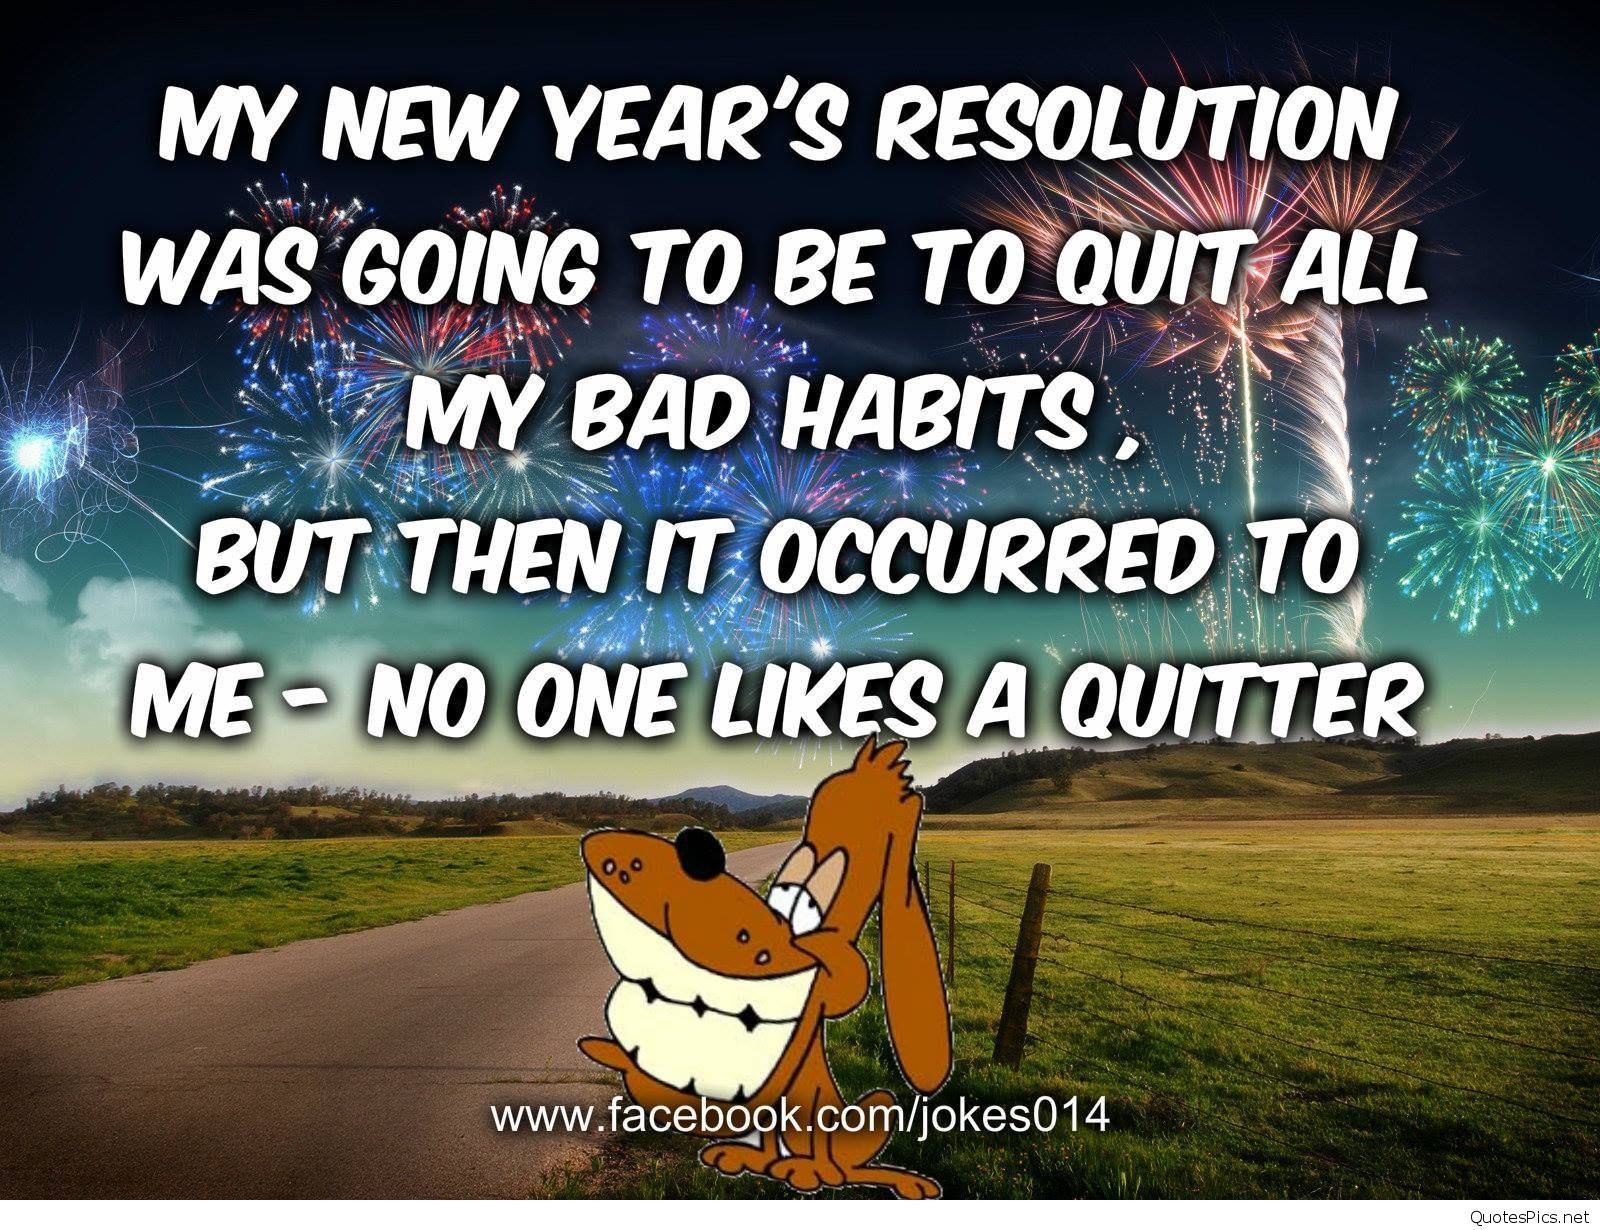 New Year Resolution Quotes Funny
 Funny happy new year resolutions images & sayings cards 2017